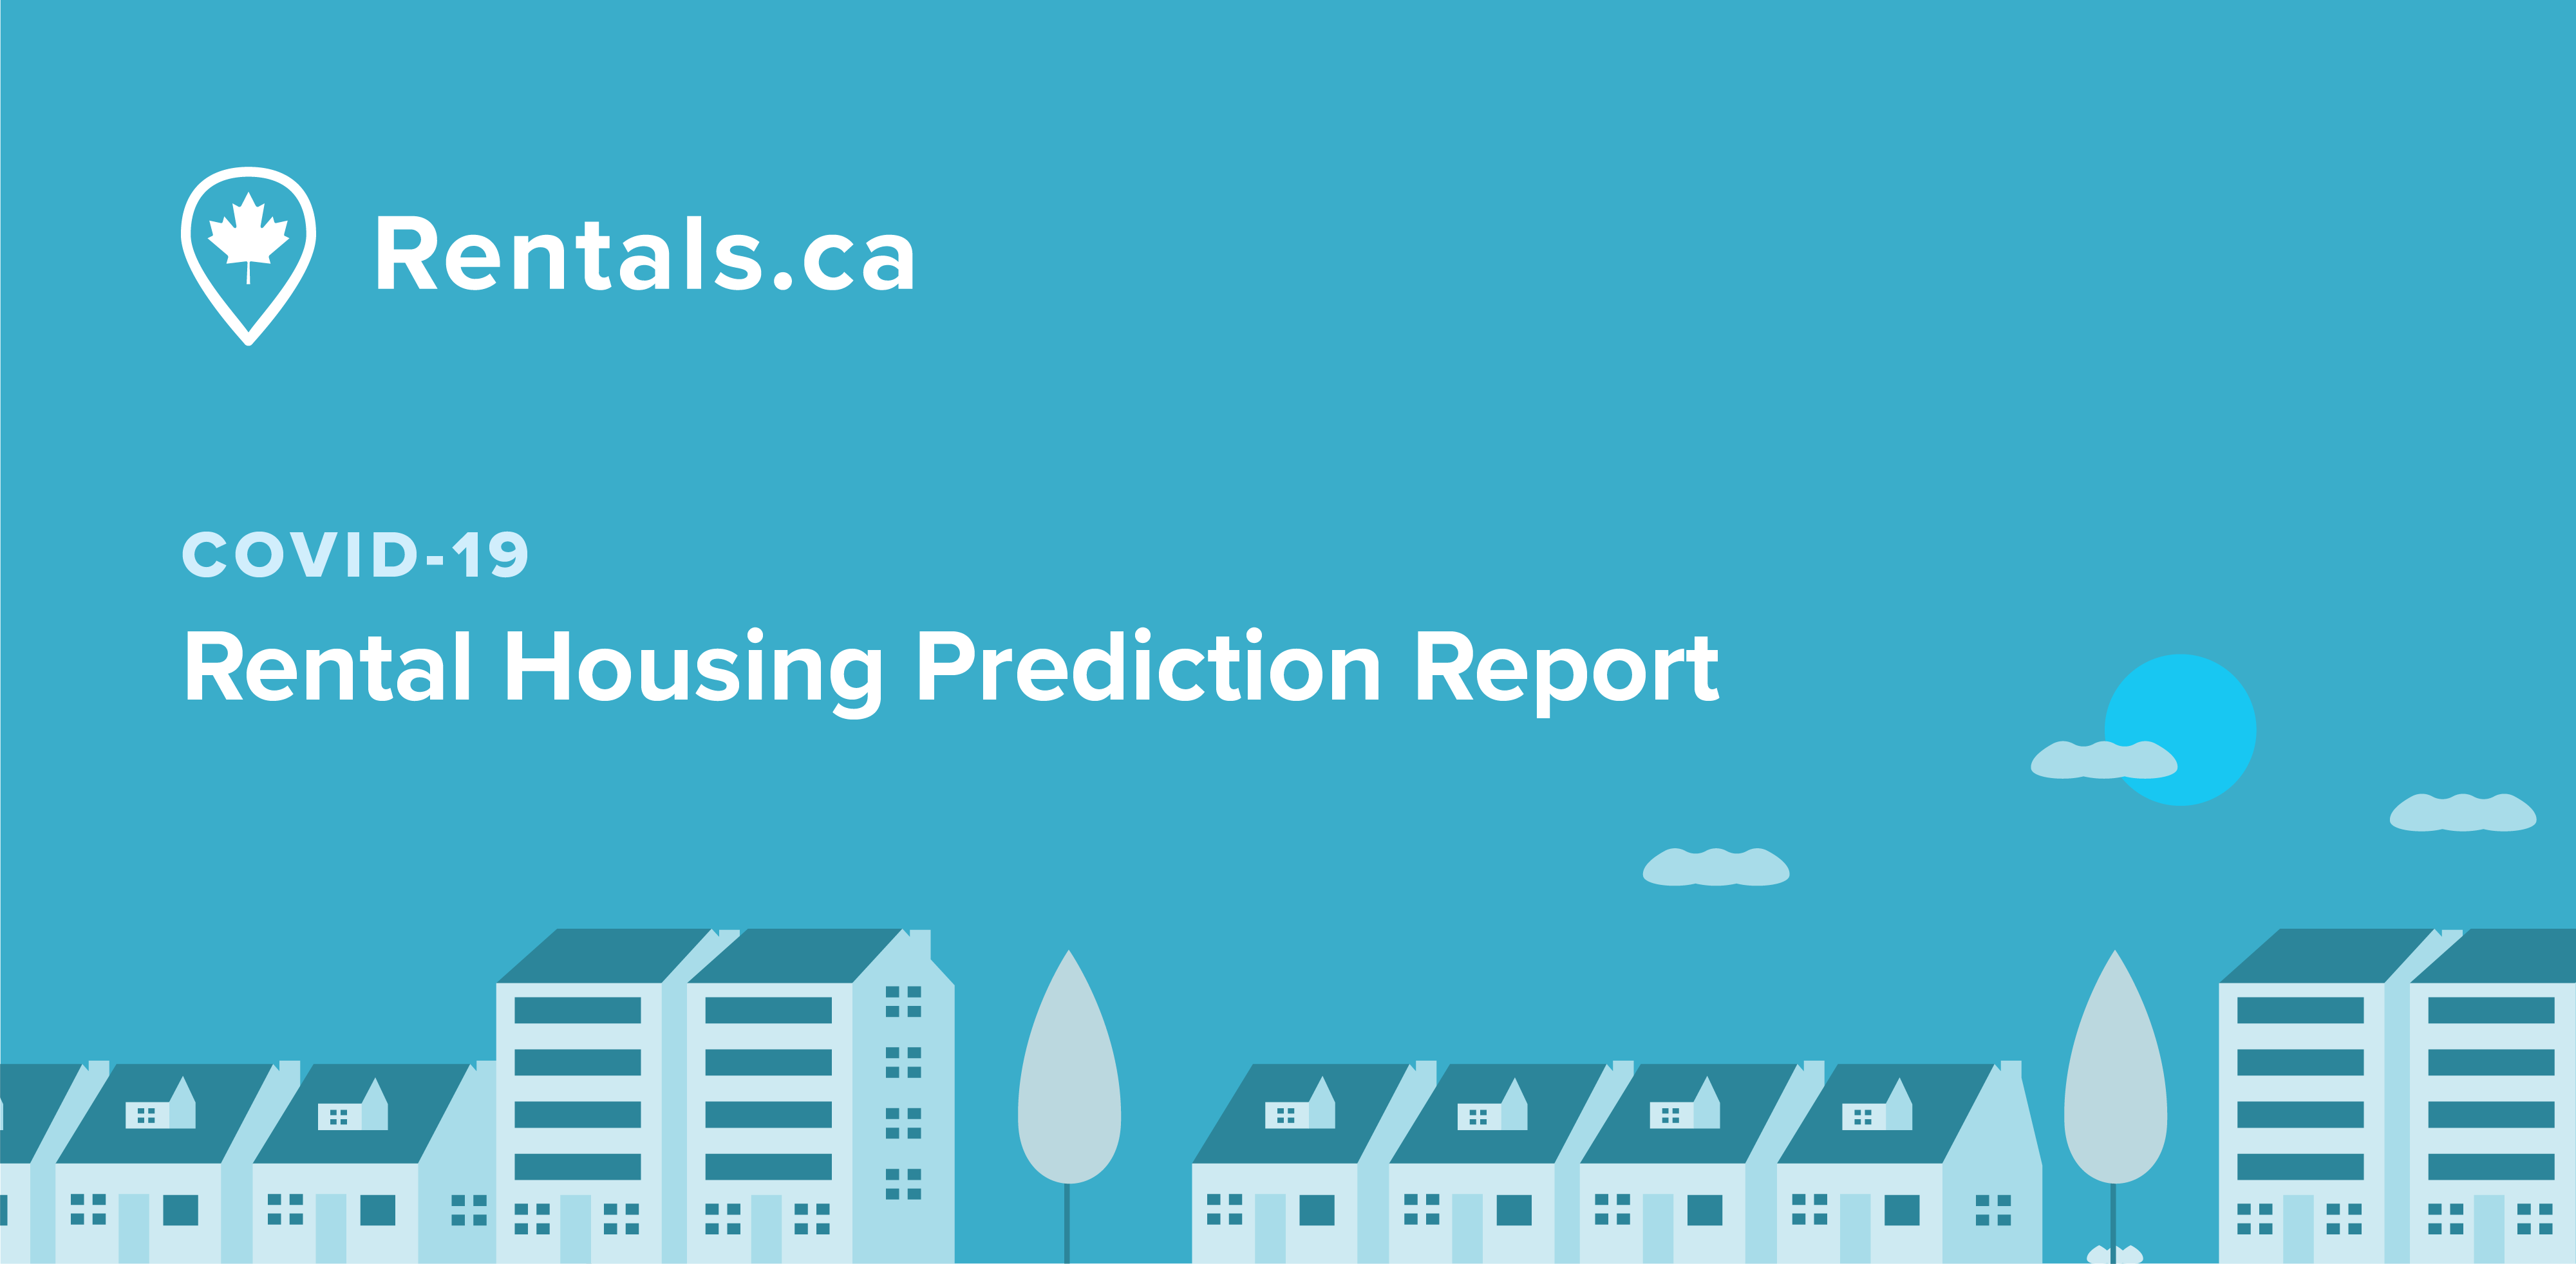 Rentals.ca COVID-19 Prediction Report: How will the pandemic reshape the rental market?